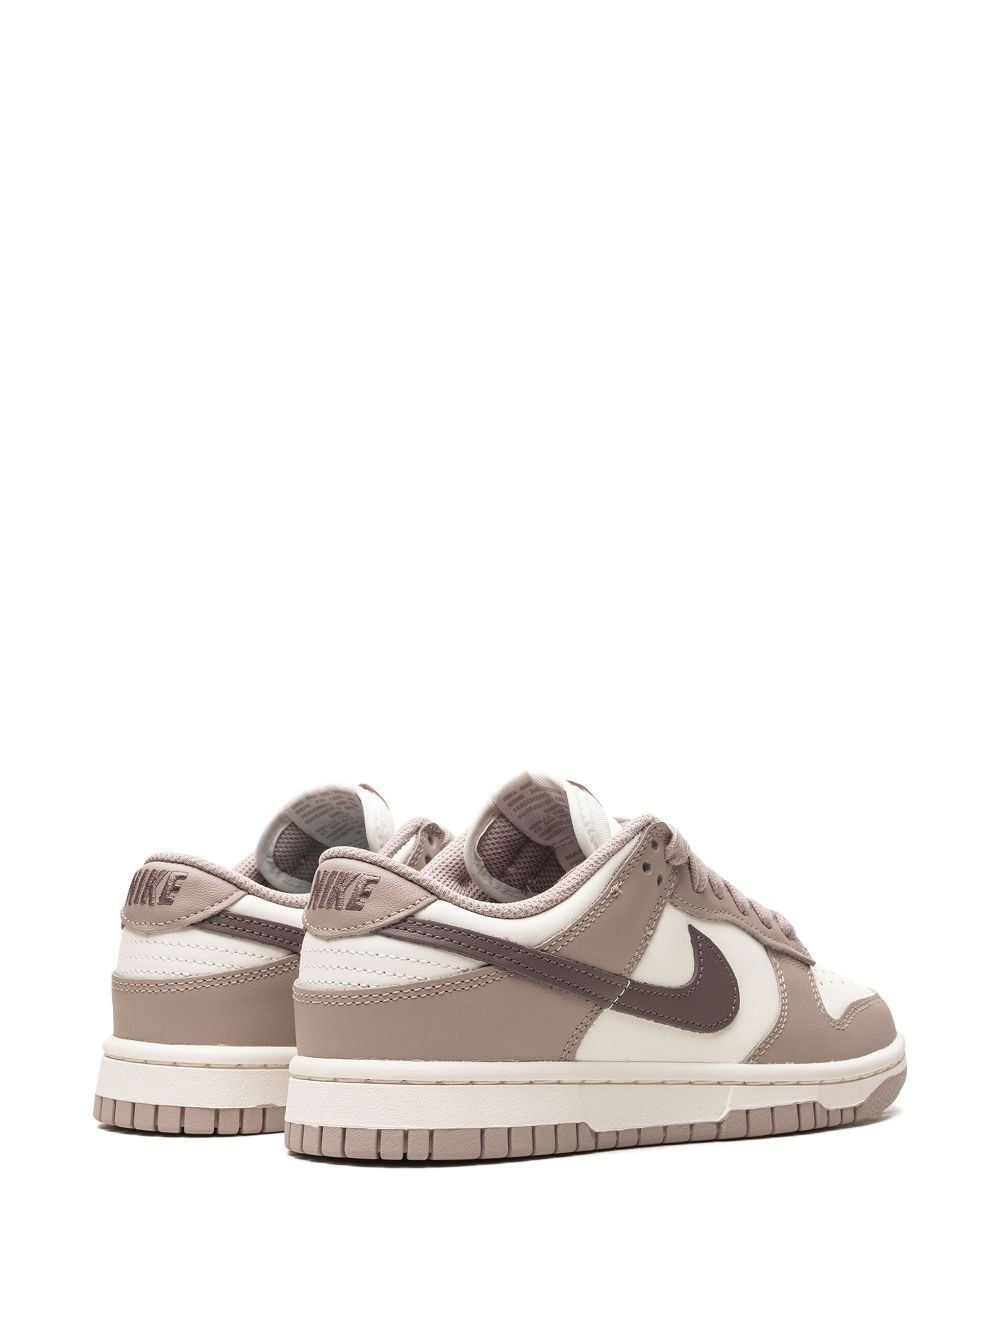 Dunk Low "Diffused Taupe" sneakers - 3